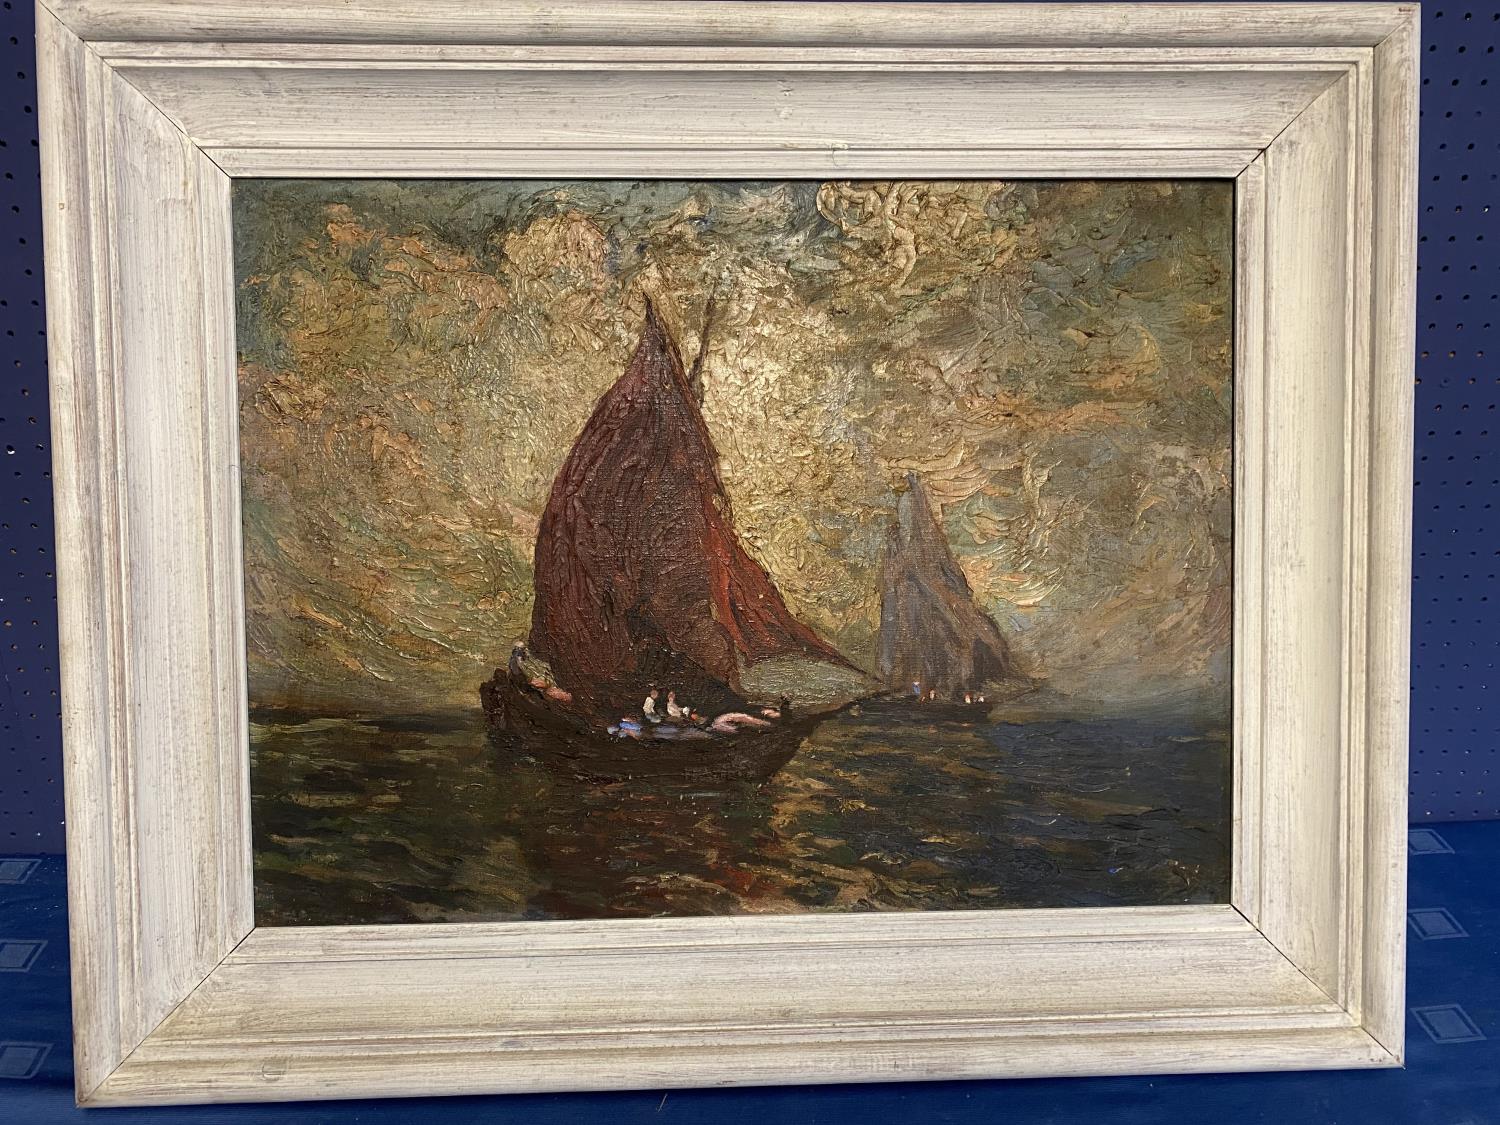 C19th, English School, possibly by Ernest Dade 1864-1935, oil on canvas, Seascape with Boats, not